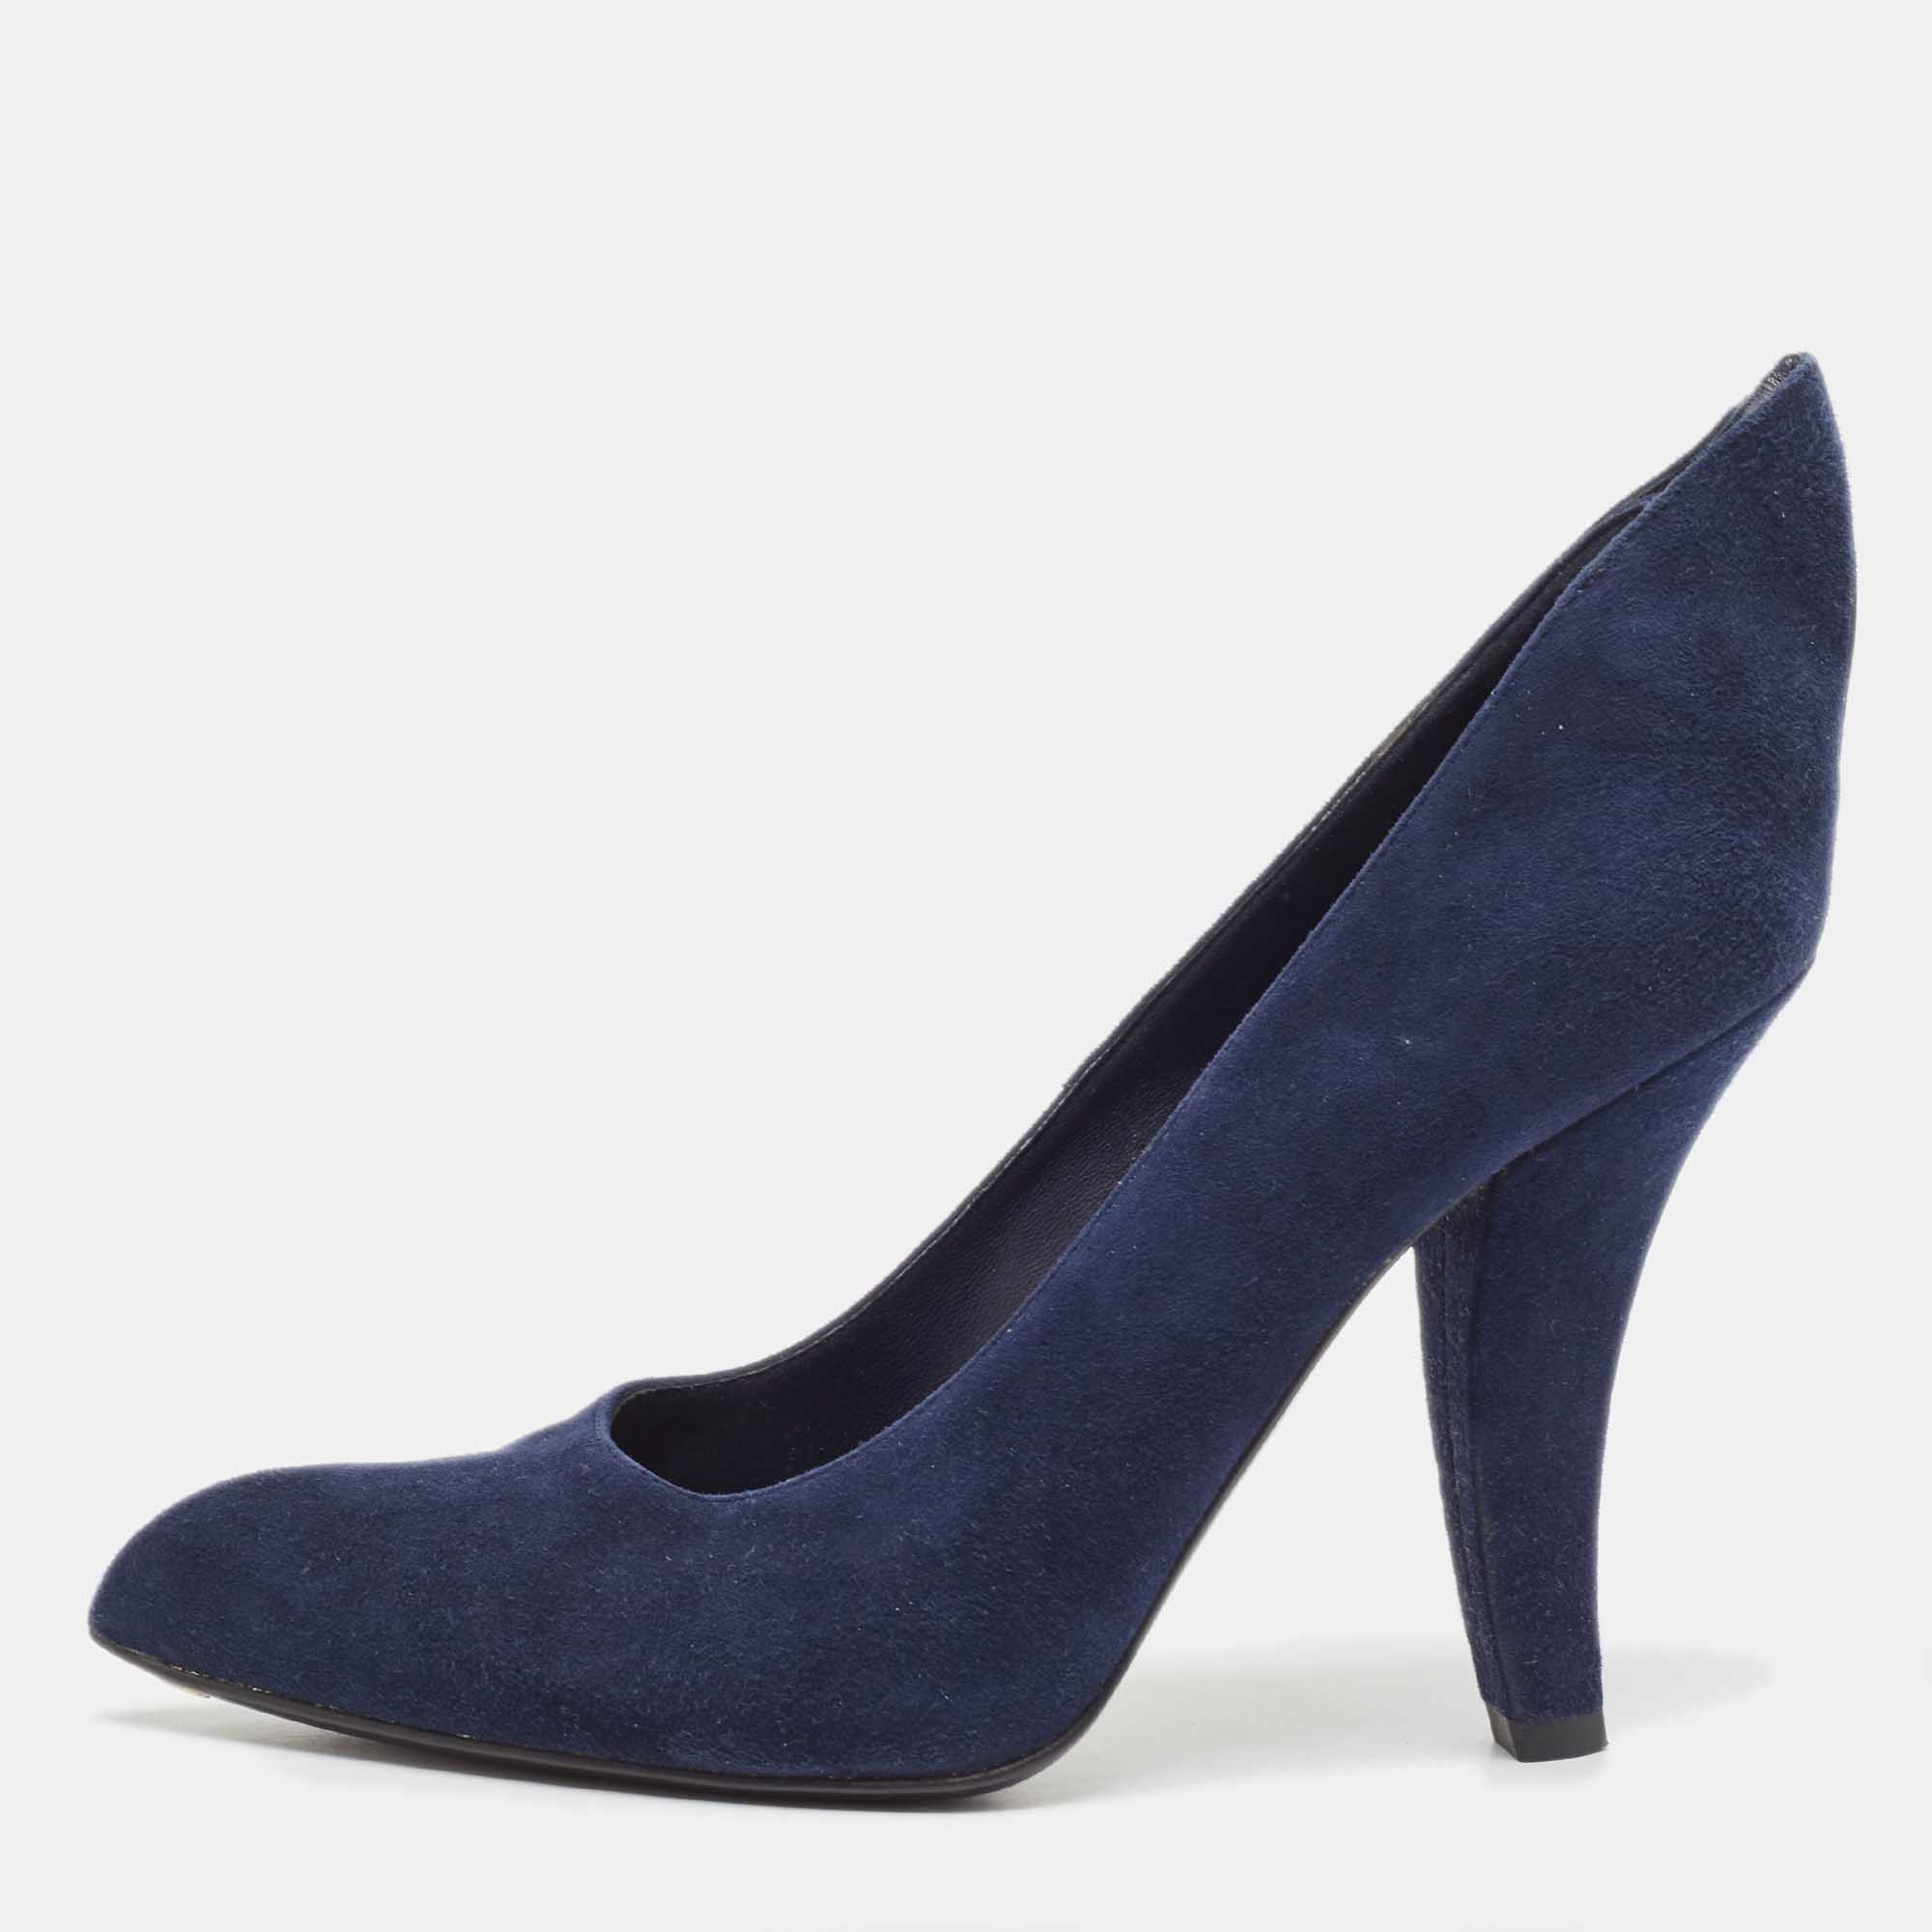 Pre-owned Louis Vuitton Navy Blue Suede Pointed Toe Pumps Size 37